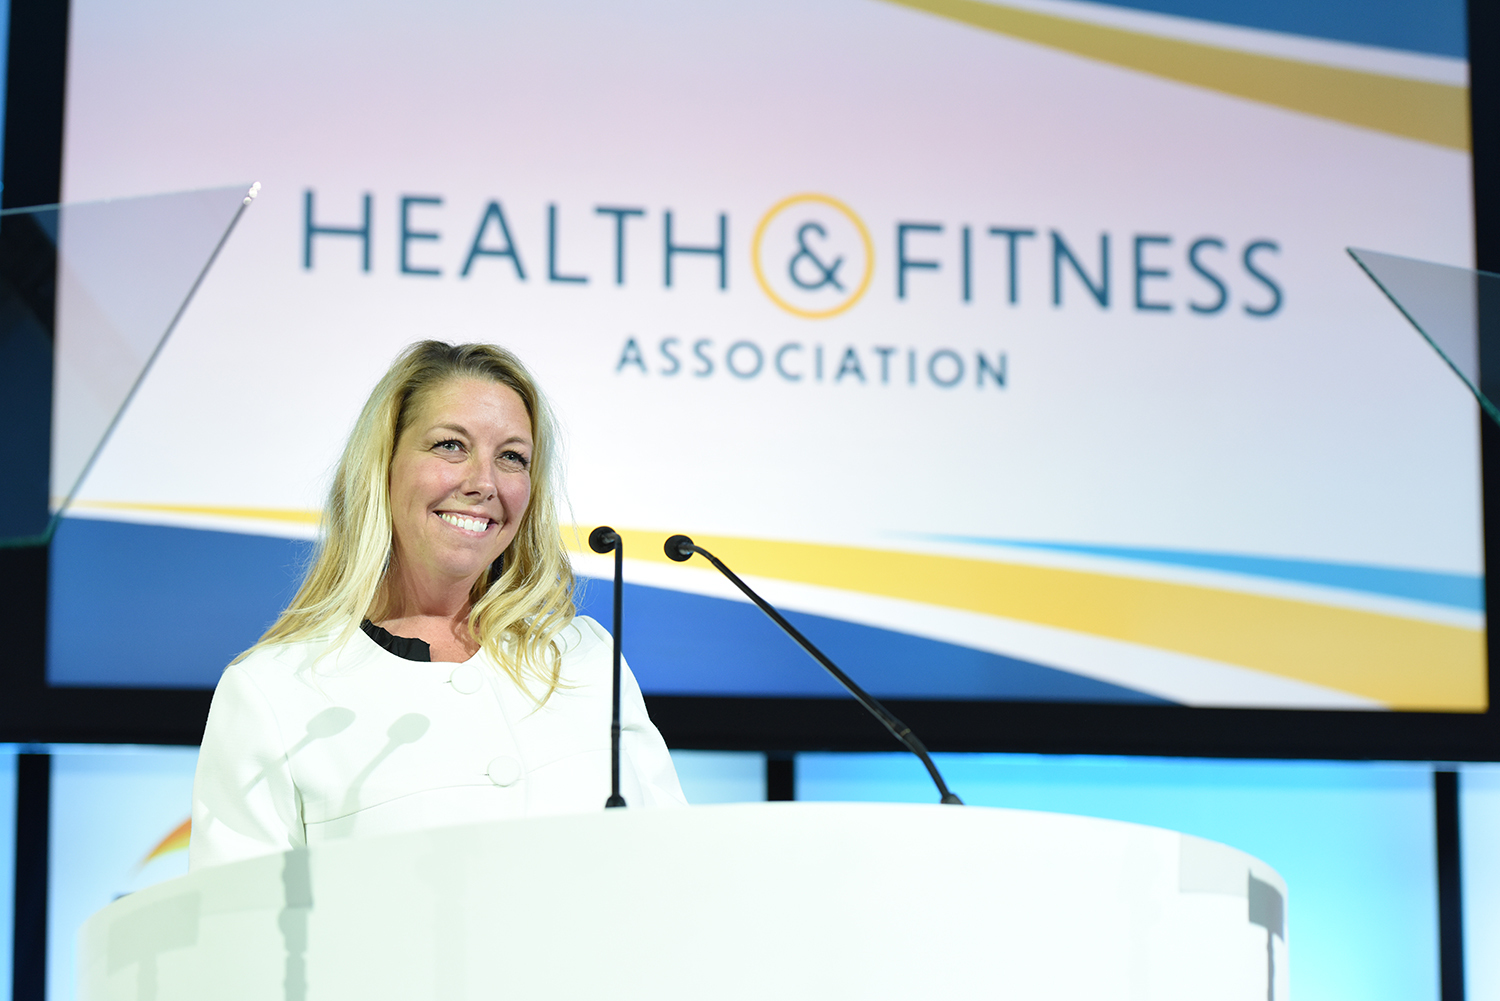 Liz announcing the Health and Fitness rebrand